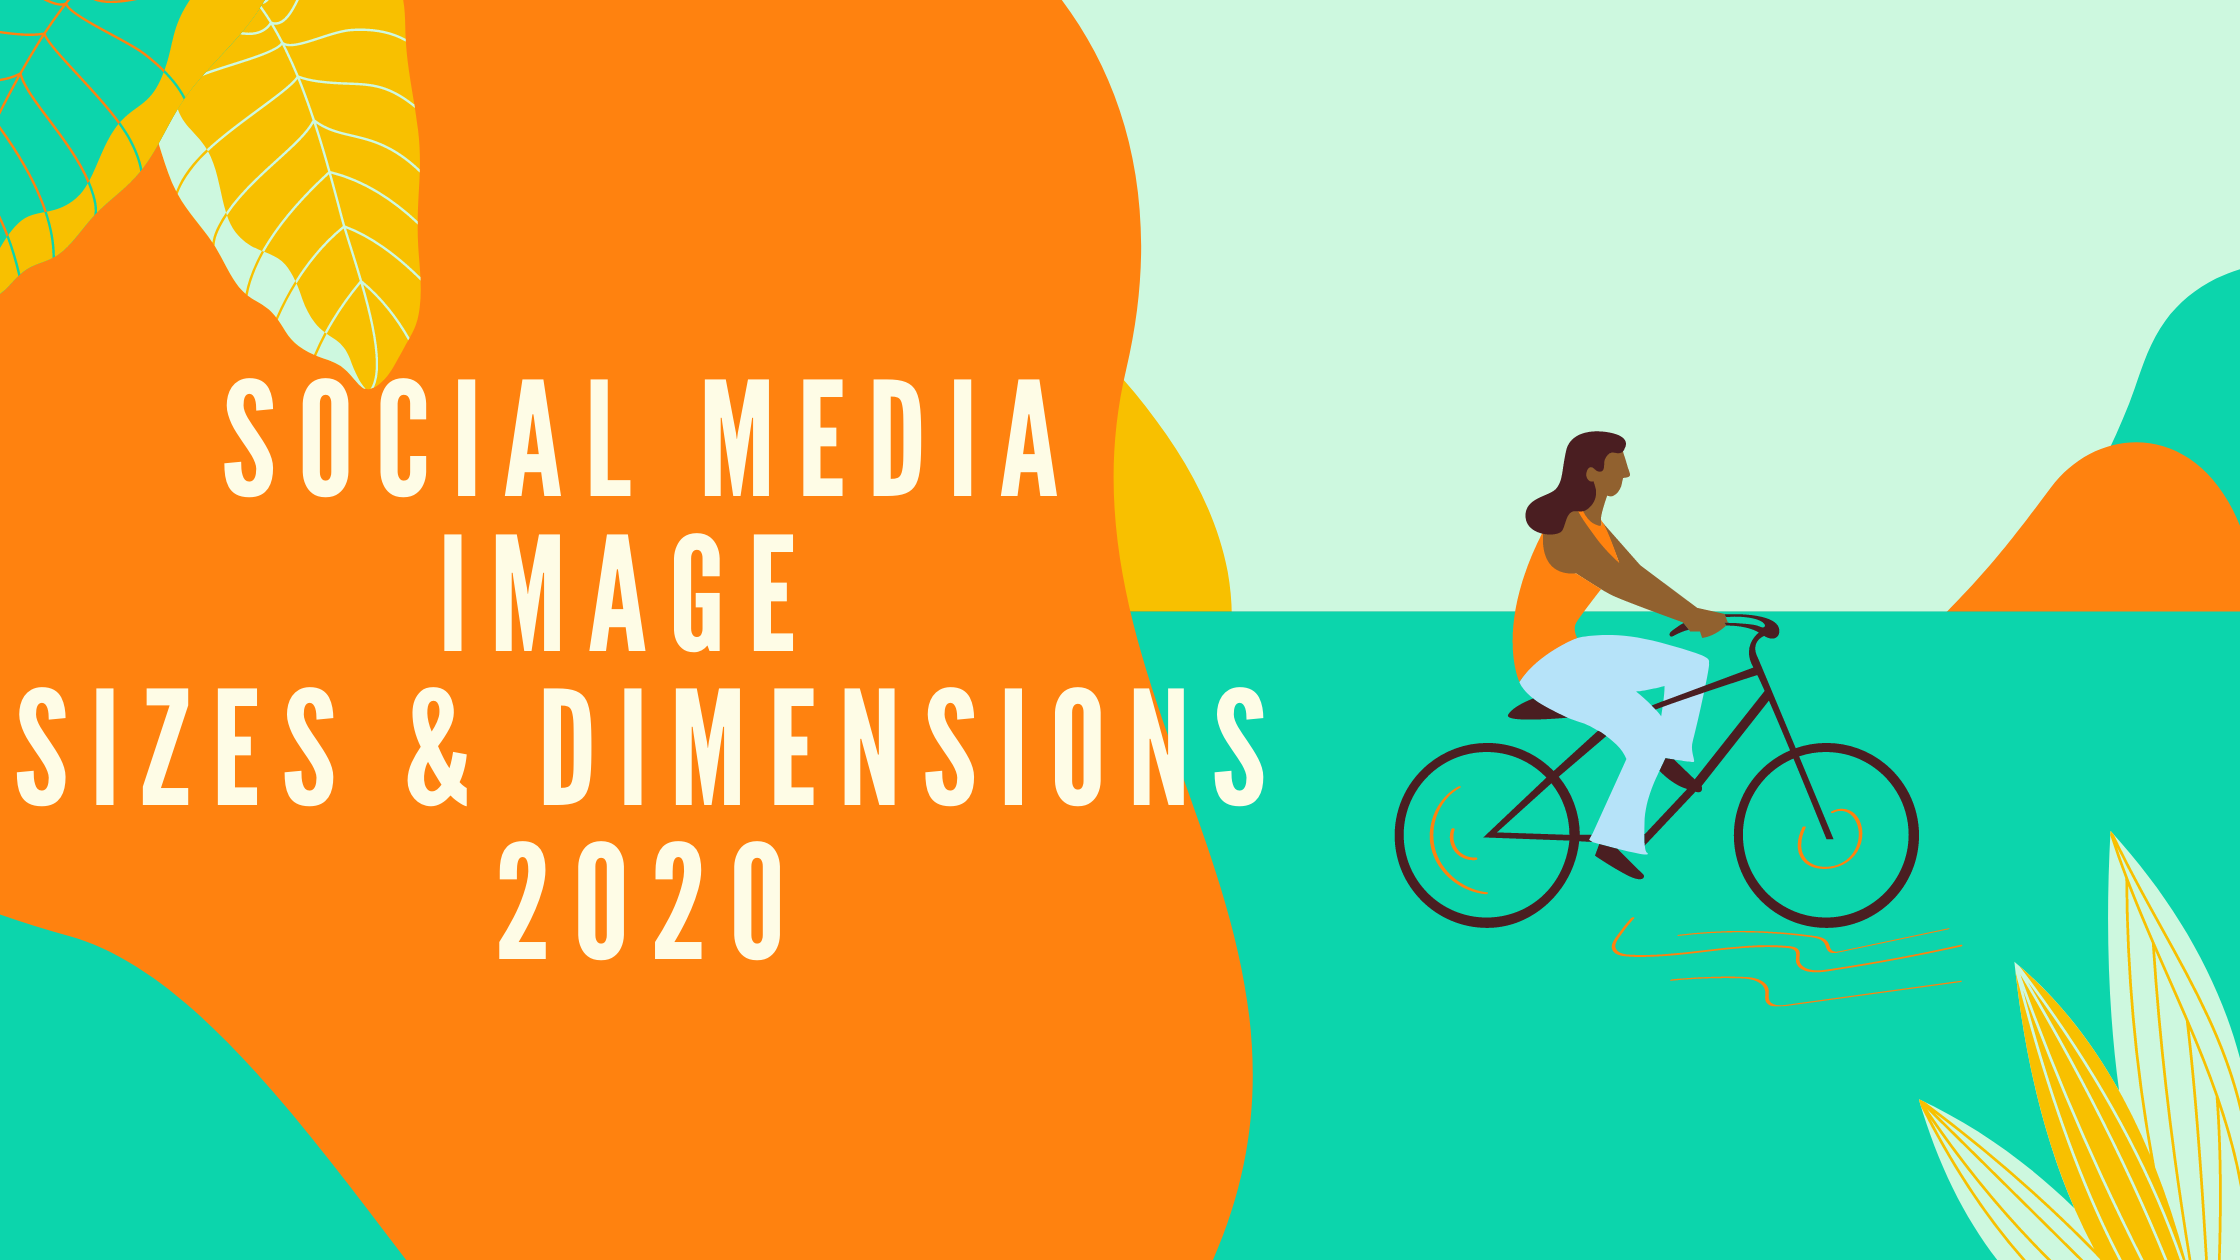 Social Media Image sizes and dimensions 2020